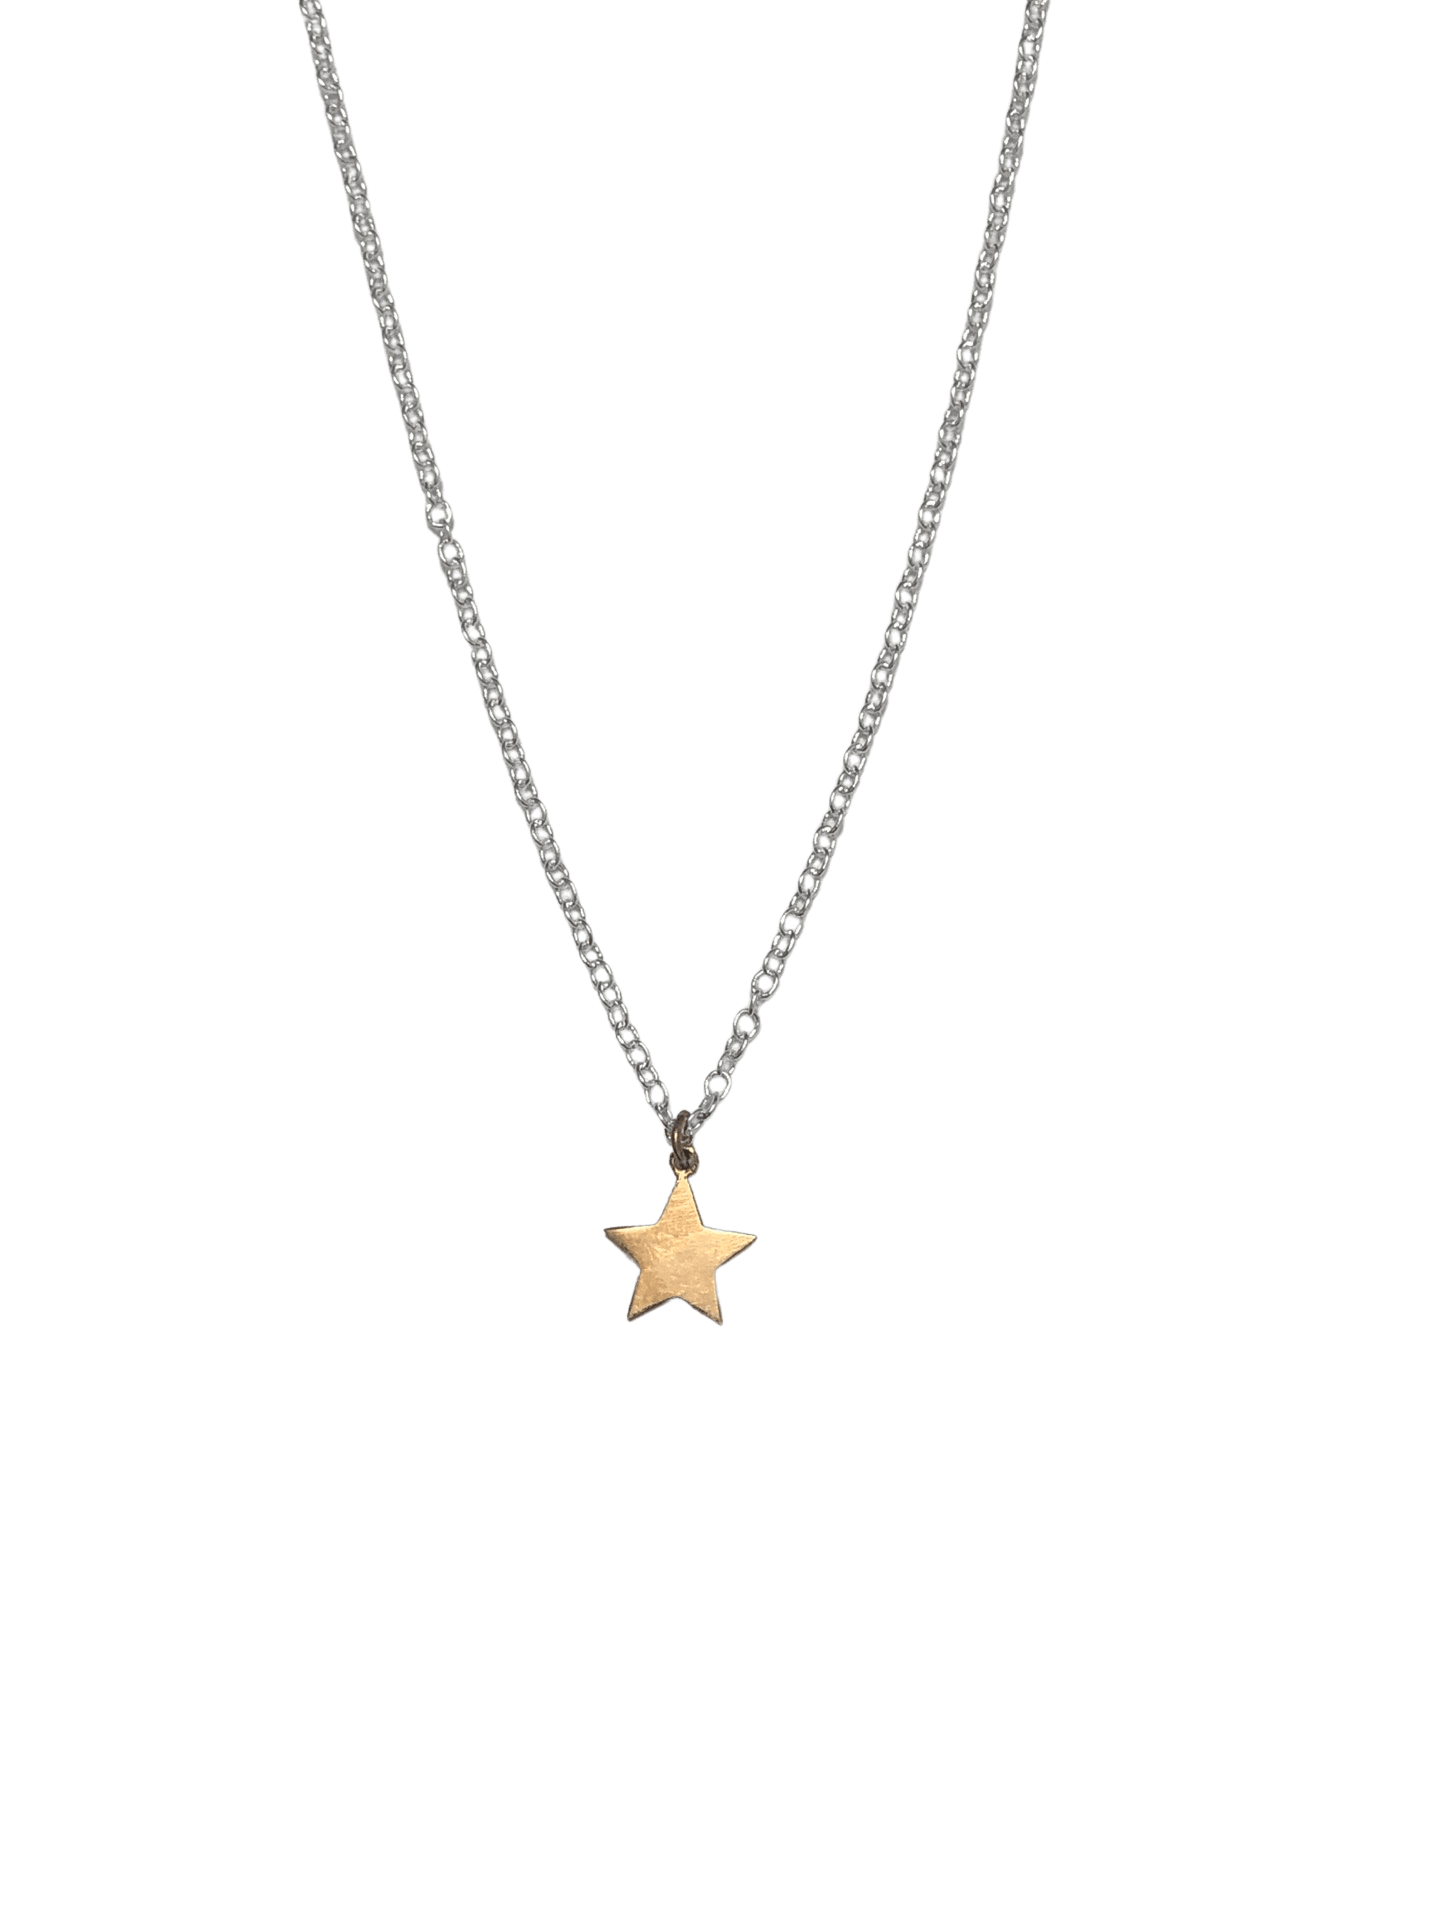 Star Charm Necklace - Silver/Rose Vermeil - offe market